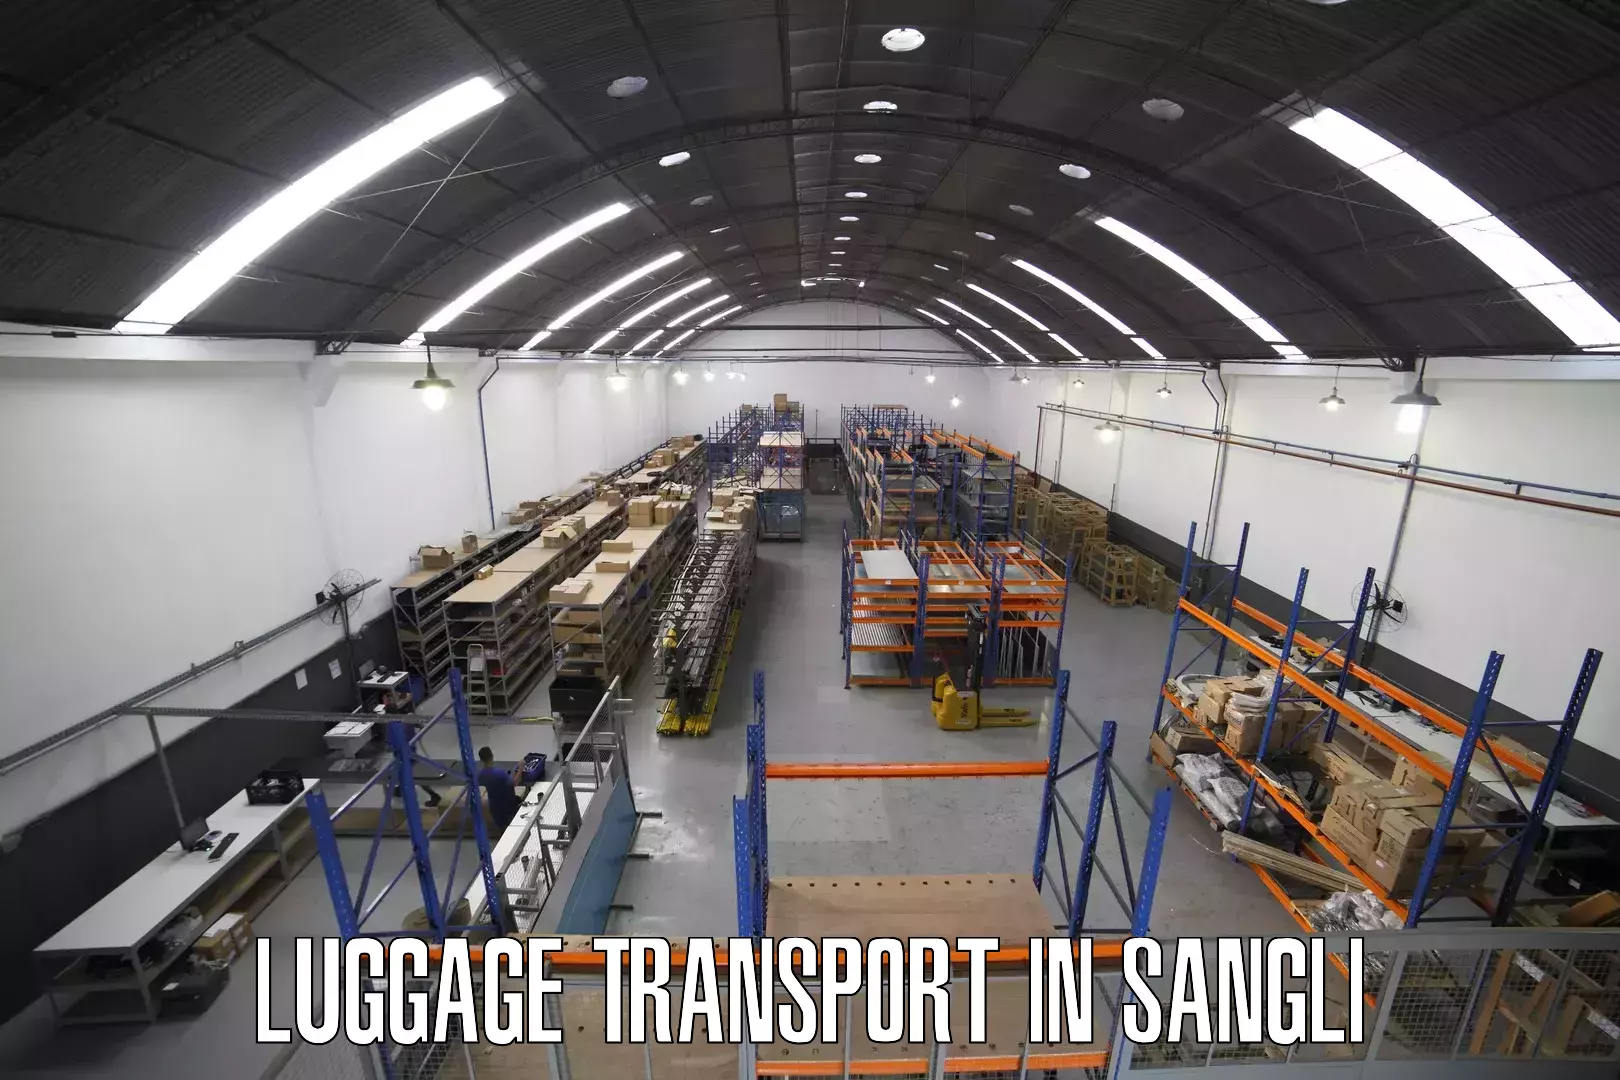 Discounted baggage transport in Sangli